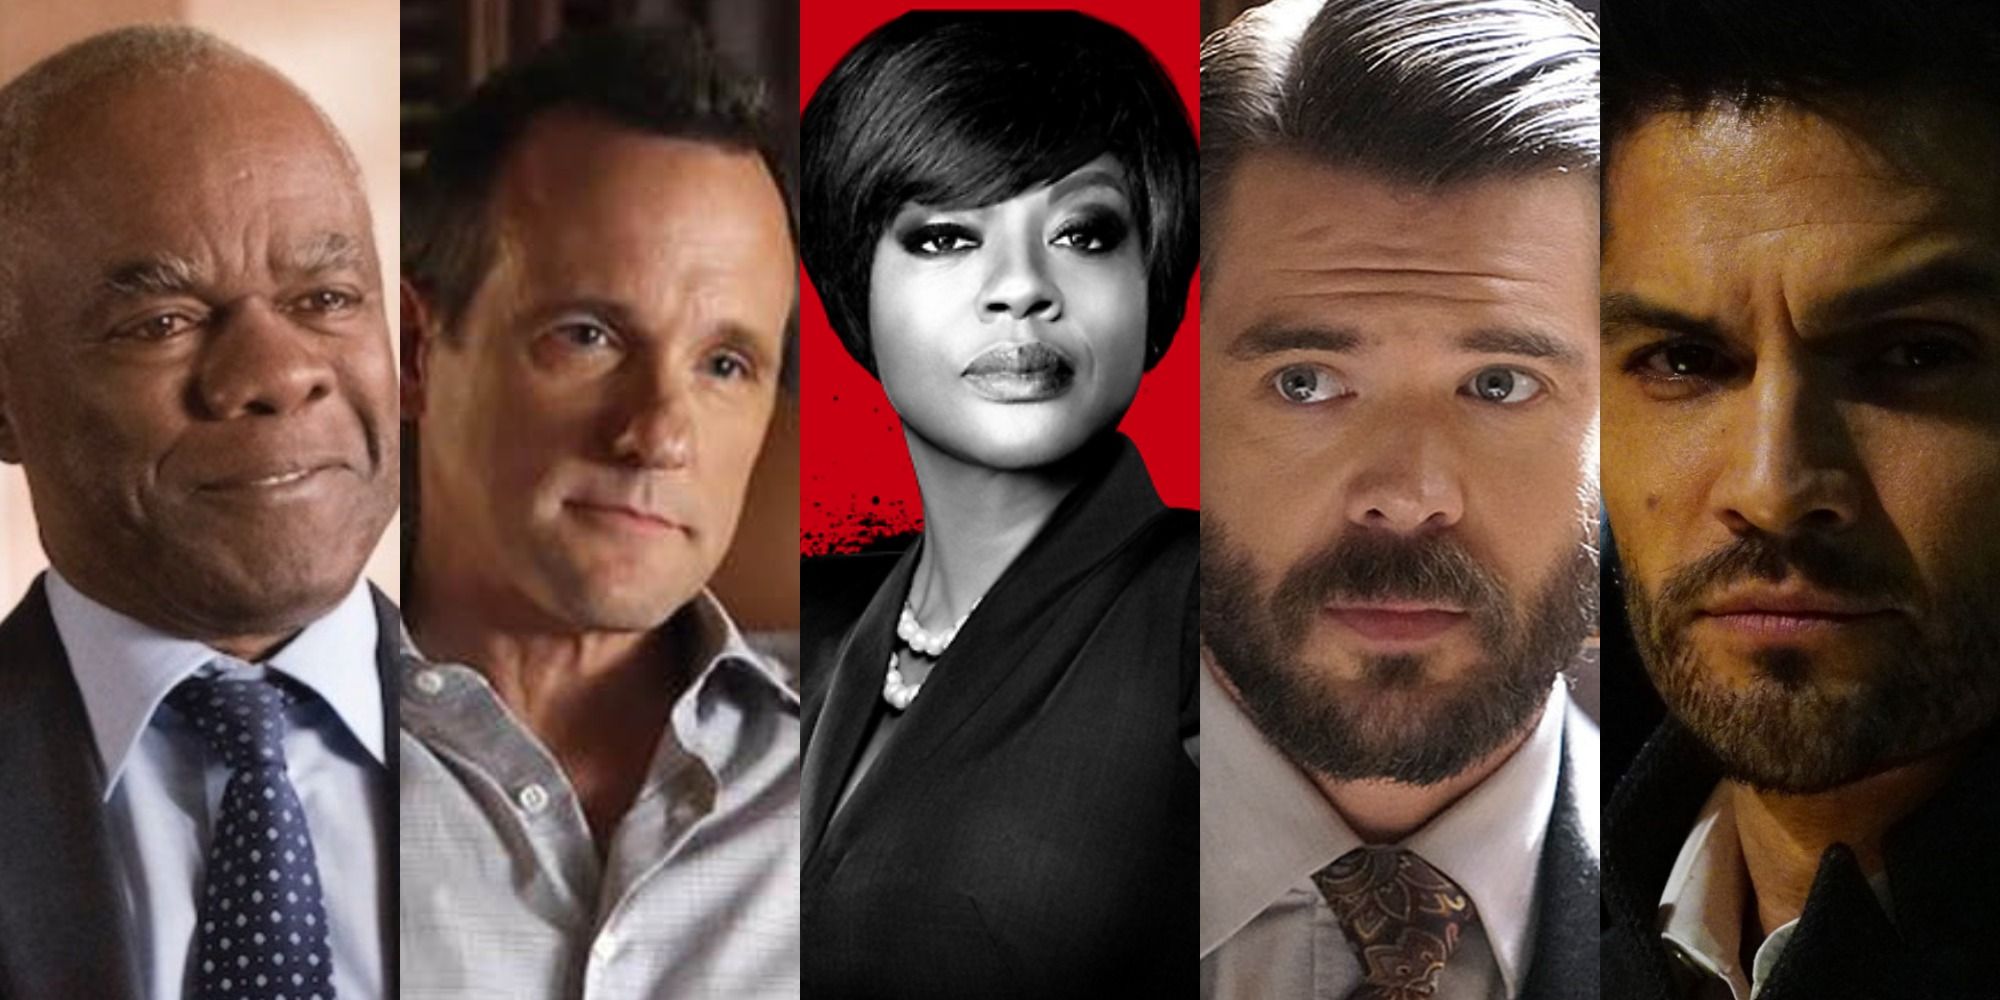 how to get away with a murderer cast